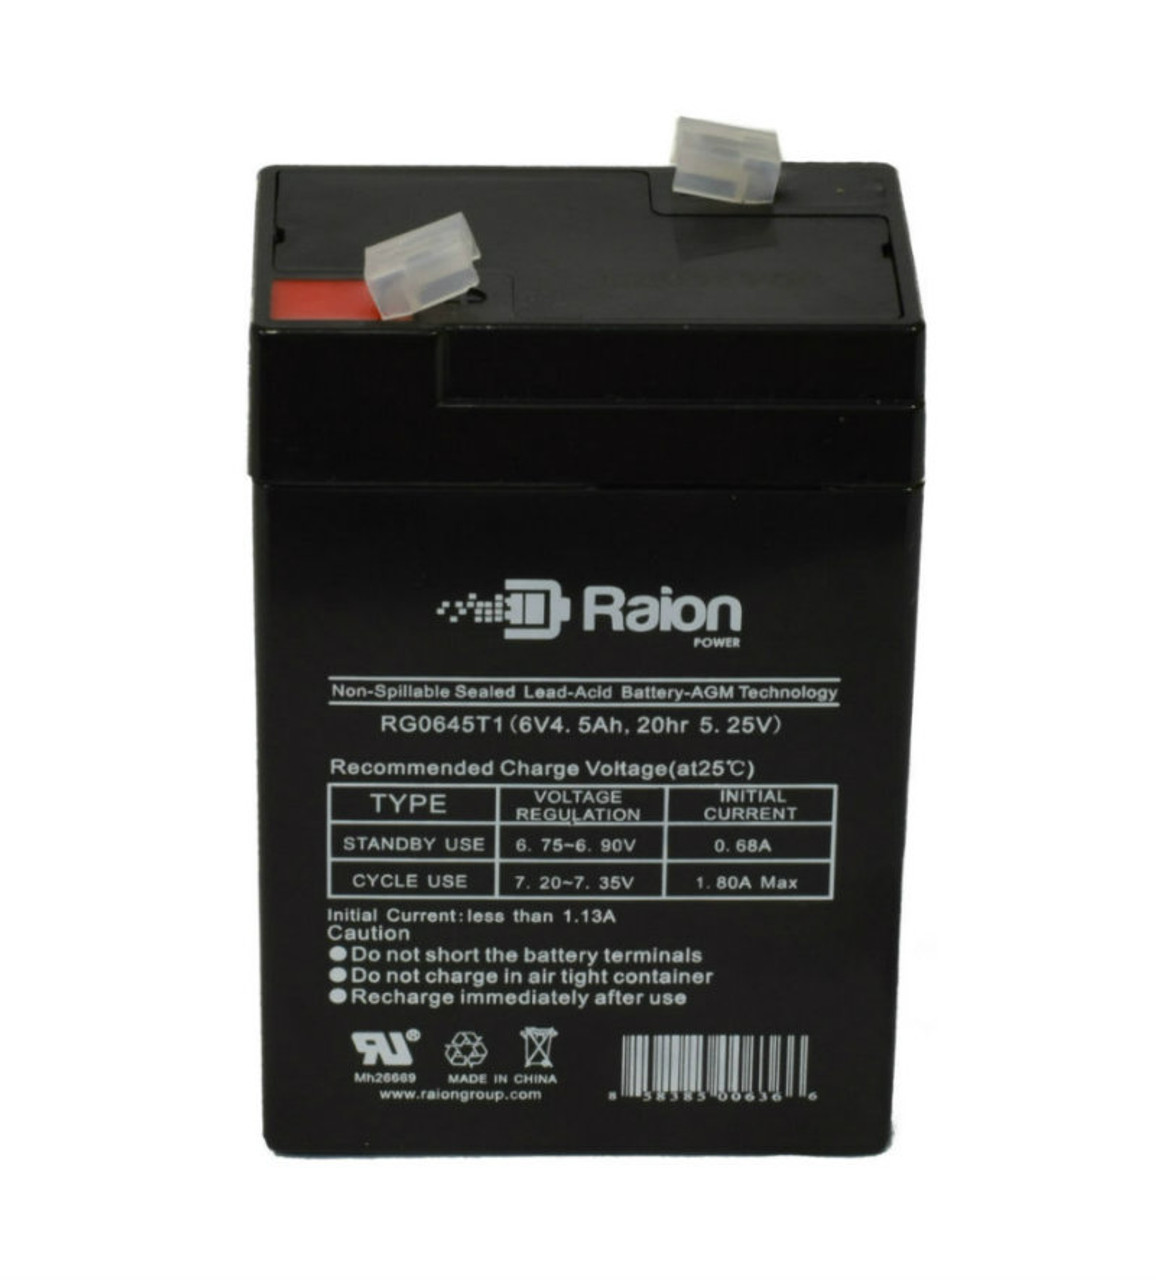 Raion Power RG0645T1 Replacement Battery Cartridge for GFX NP4-6